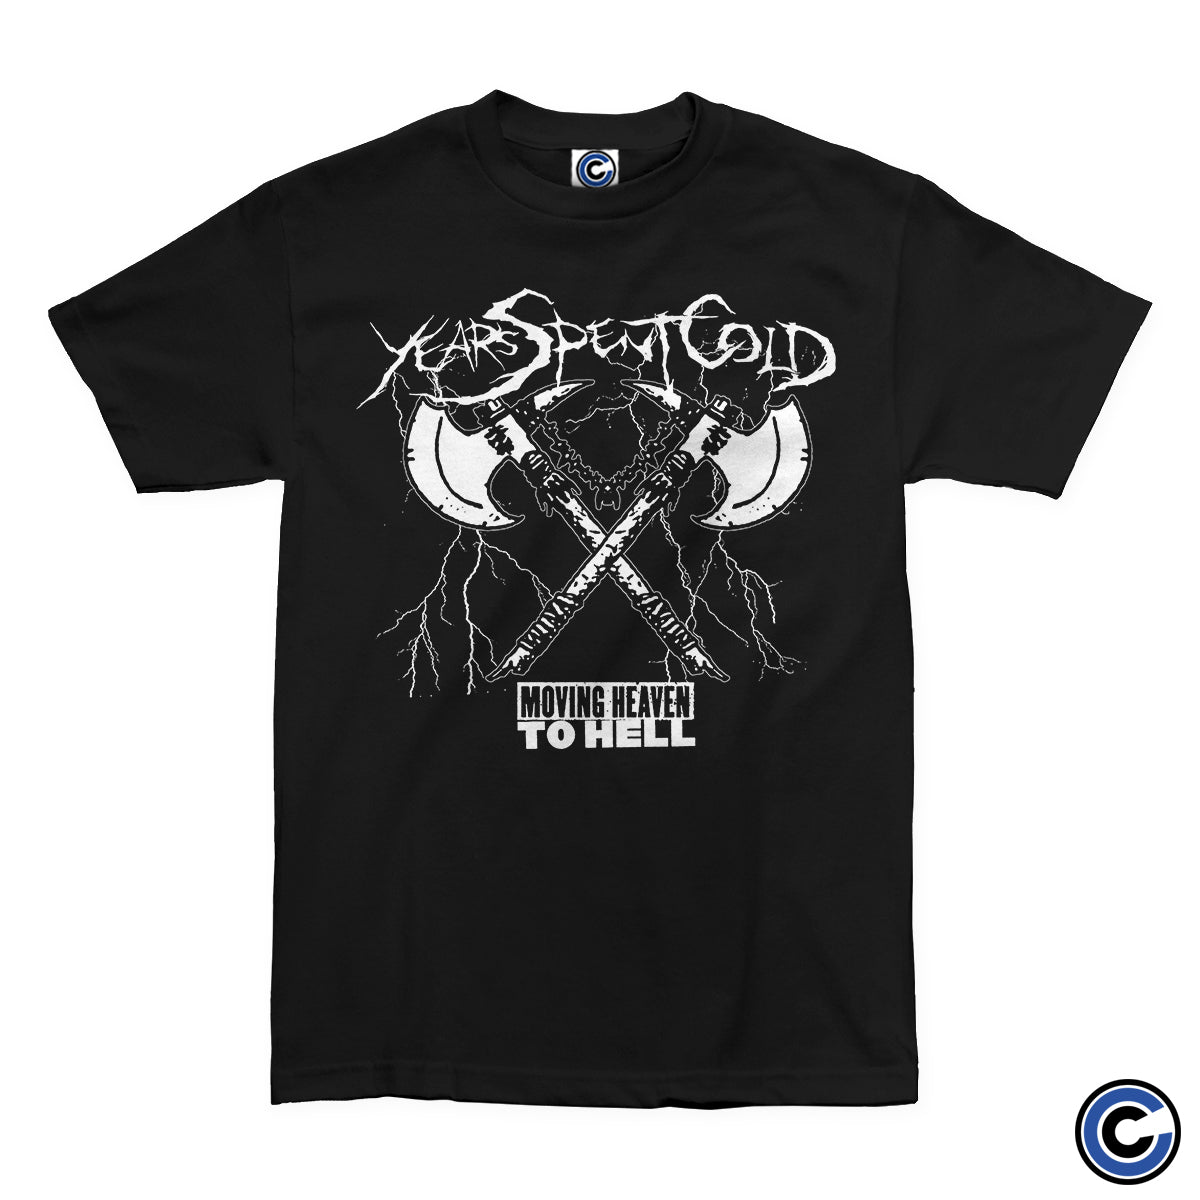 Years Spent Cold "Axe" Shirt